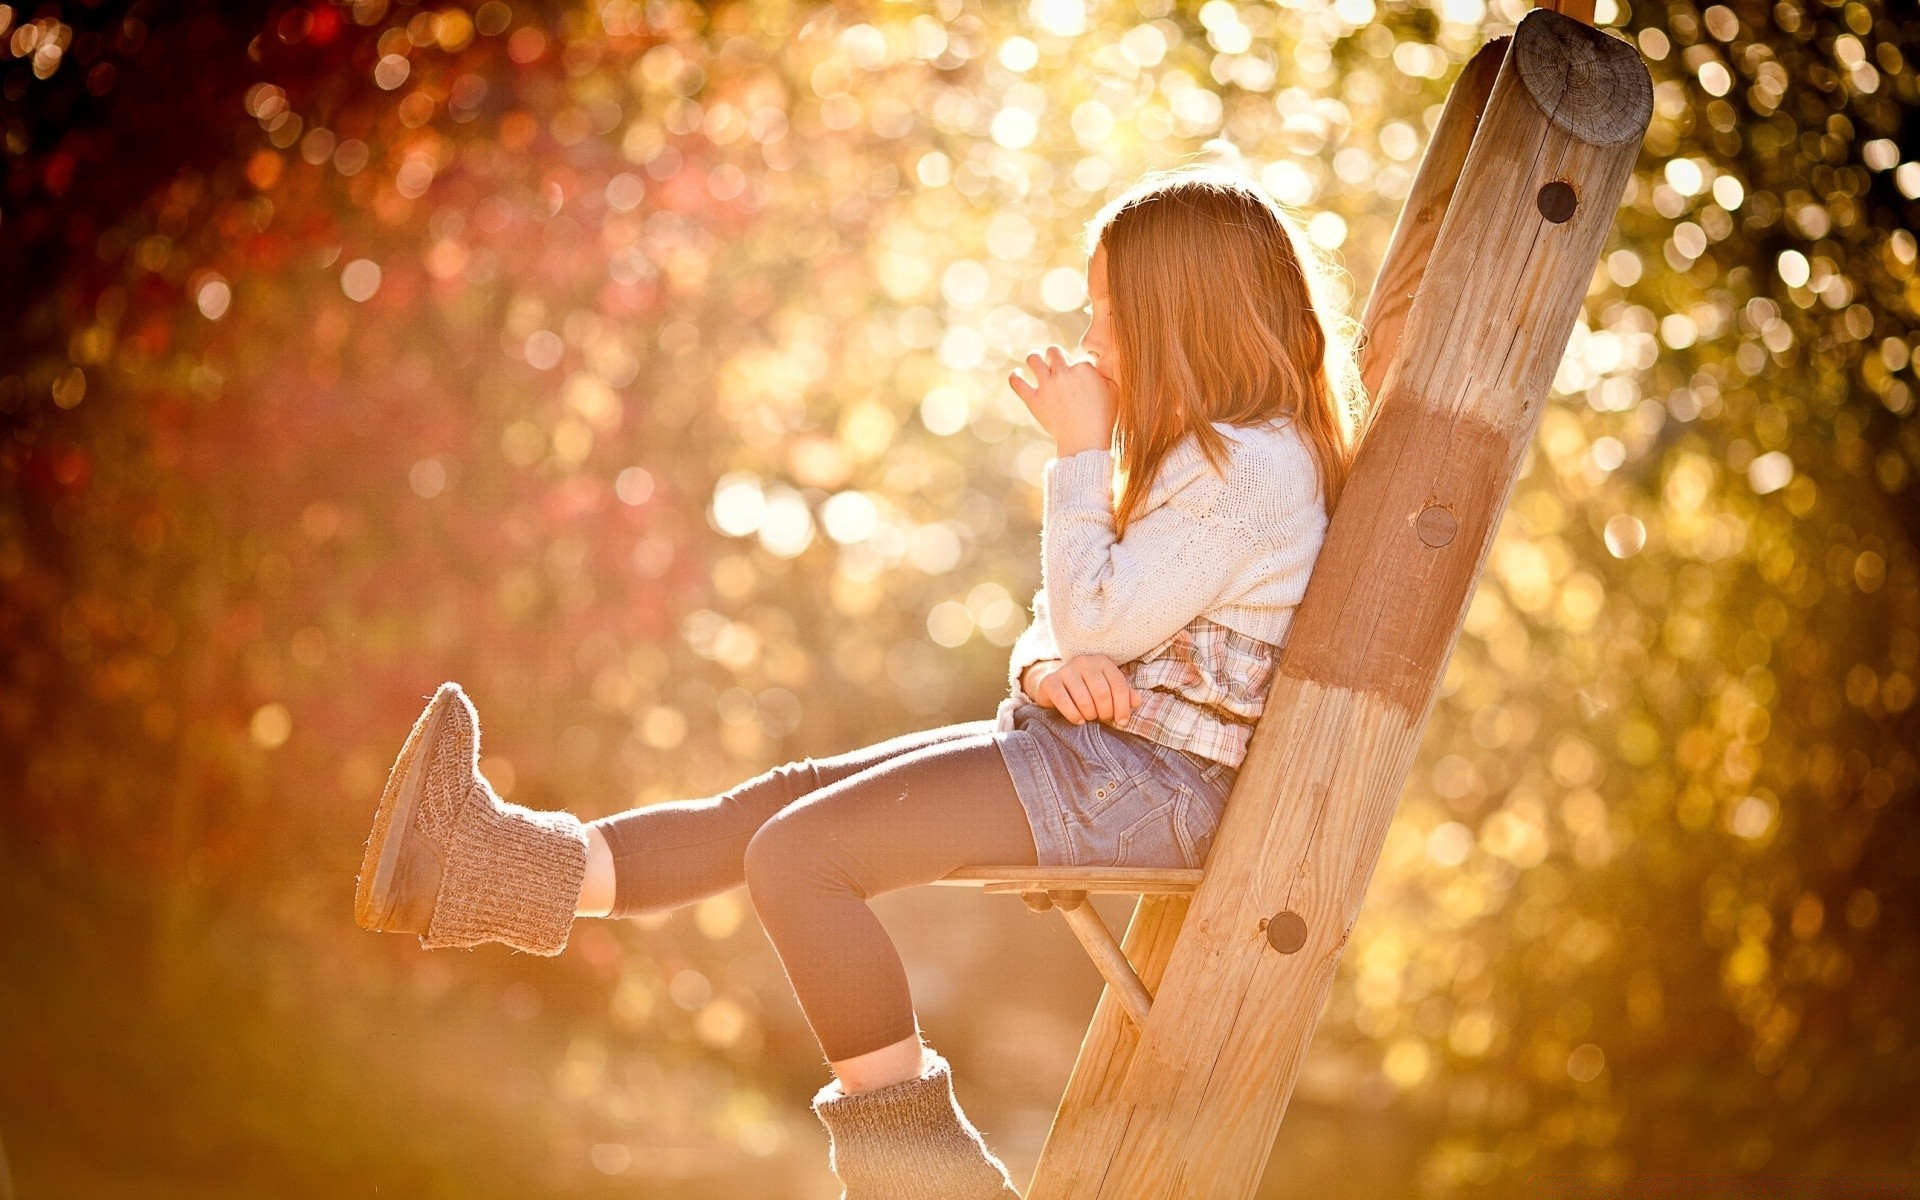 children girl woman adult one wood portrait fall fun outdoors leisure park happiness nature smile child enjoyment